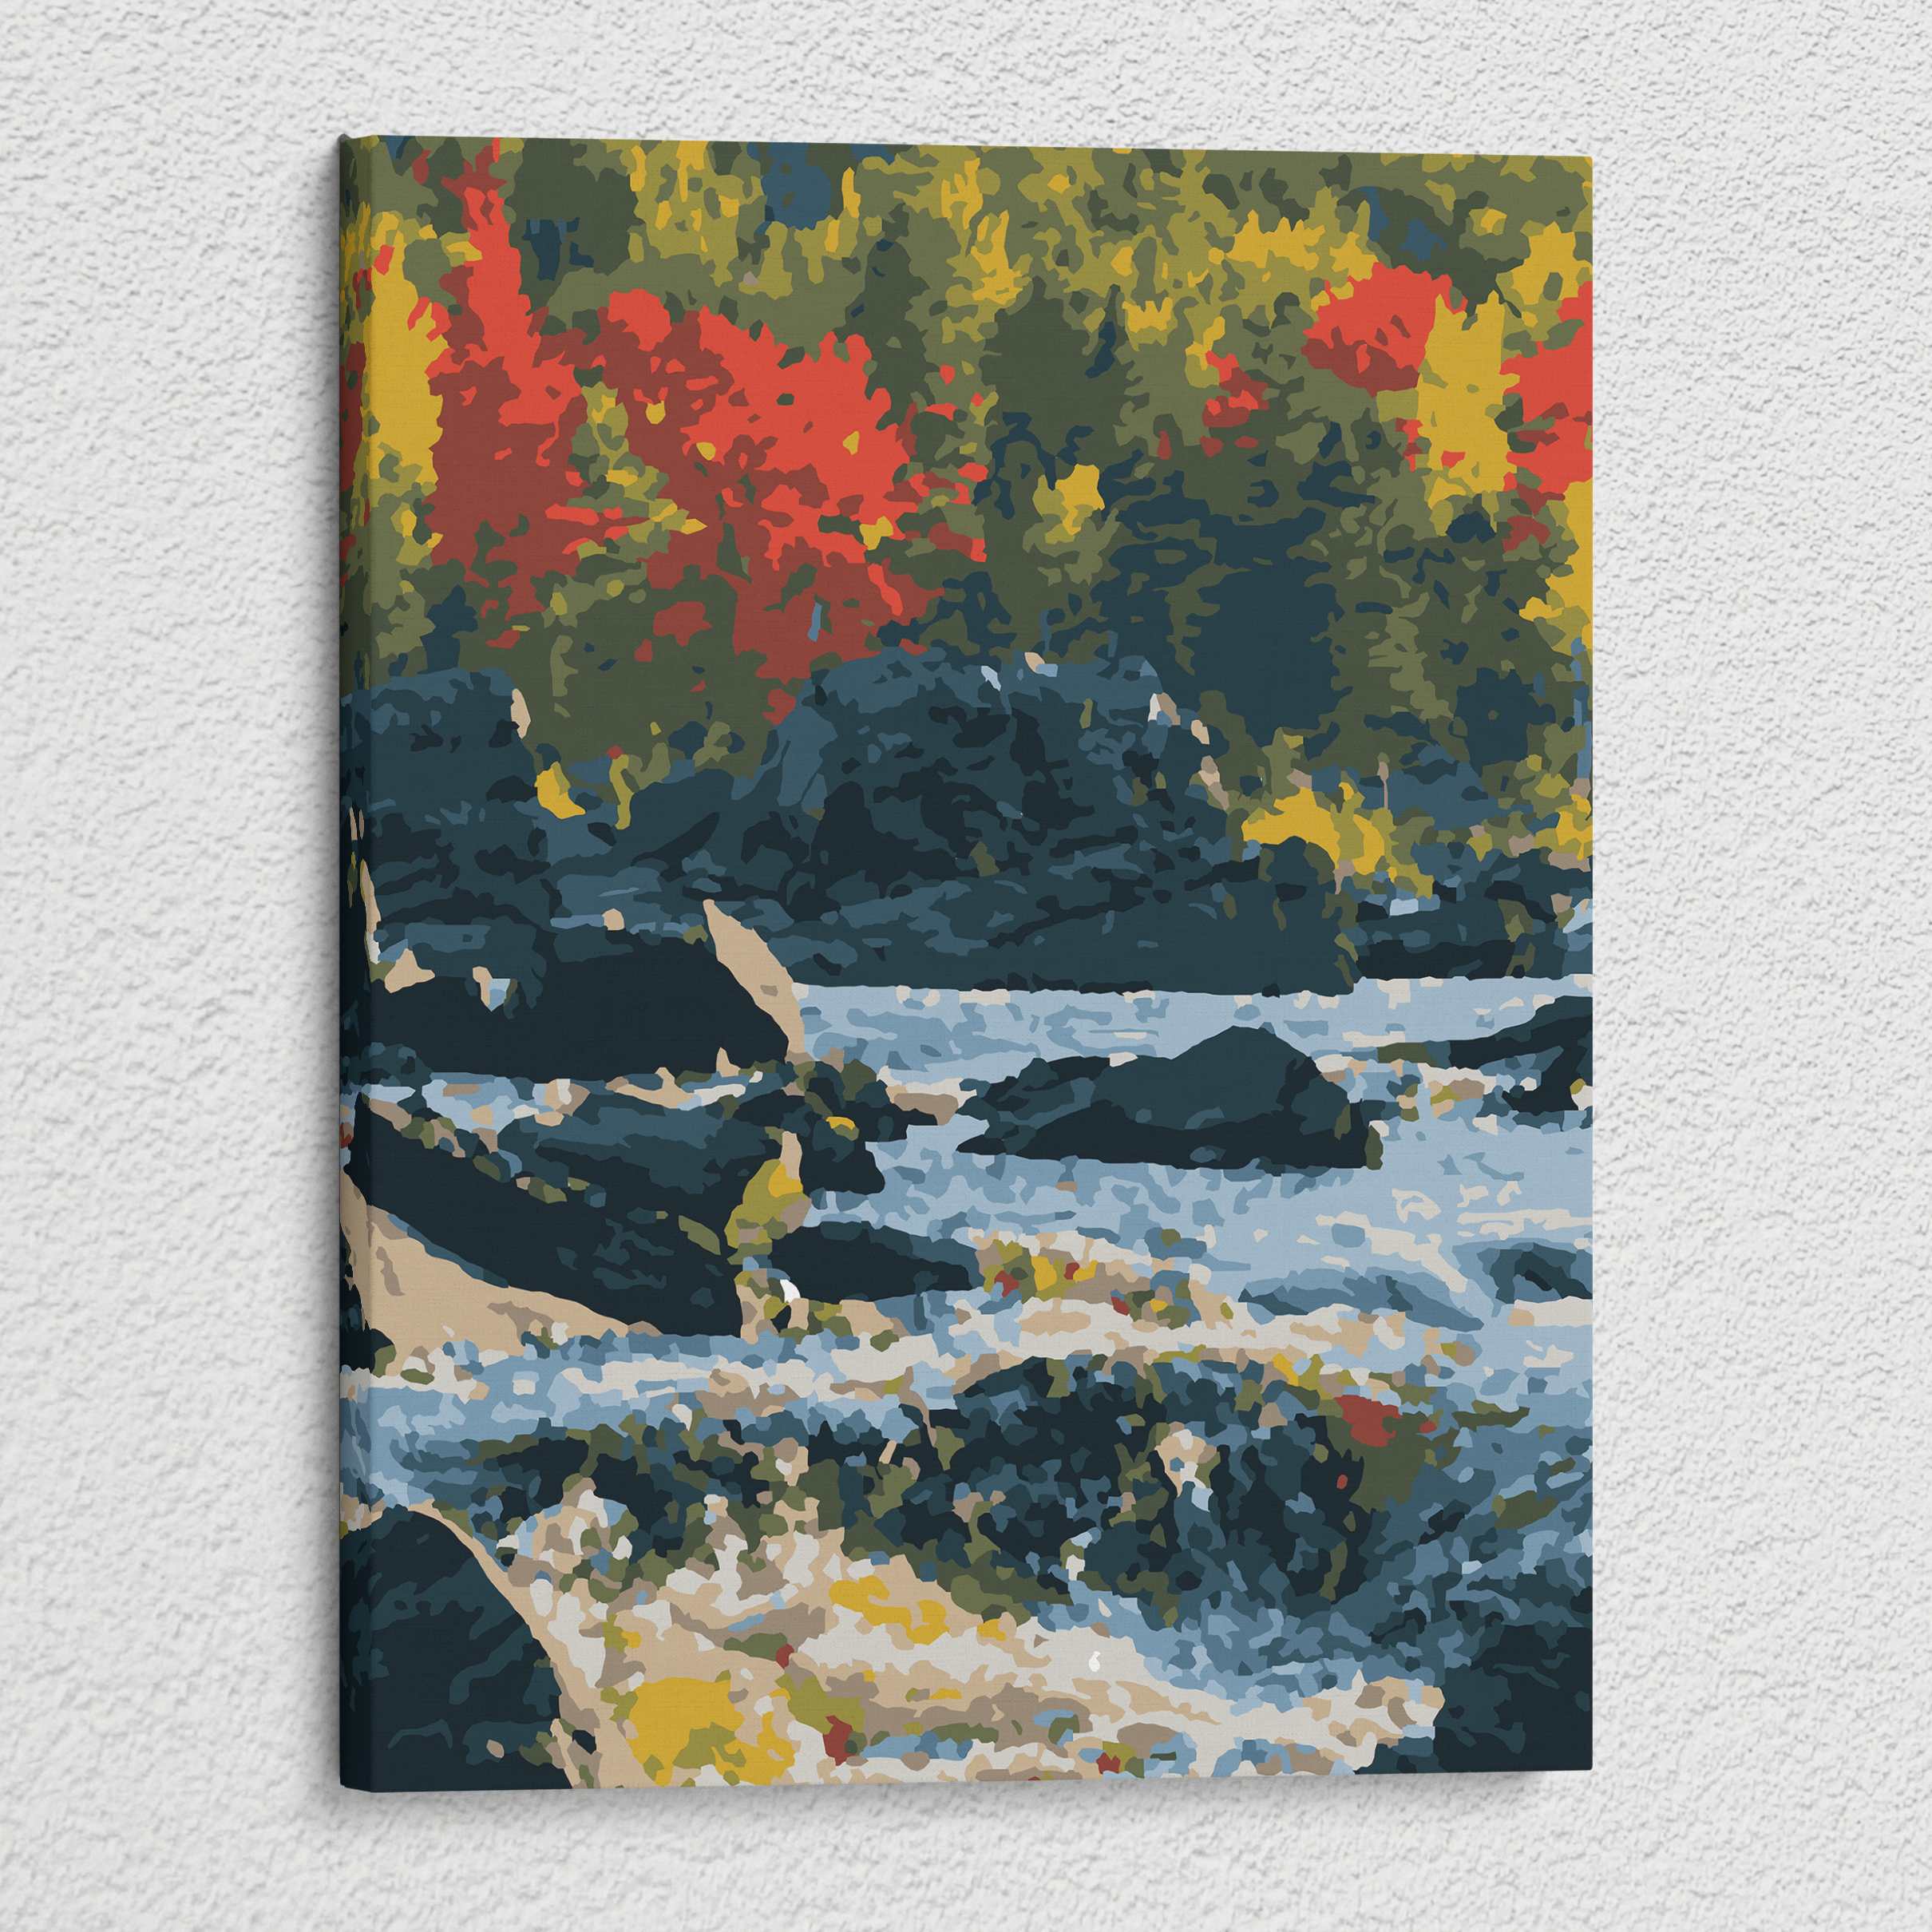 A River in the Fall - Paint By Numbers Kit